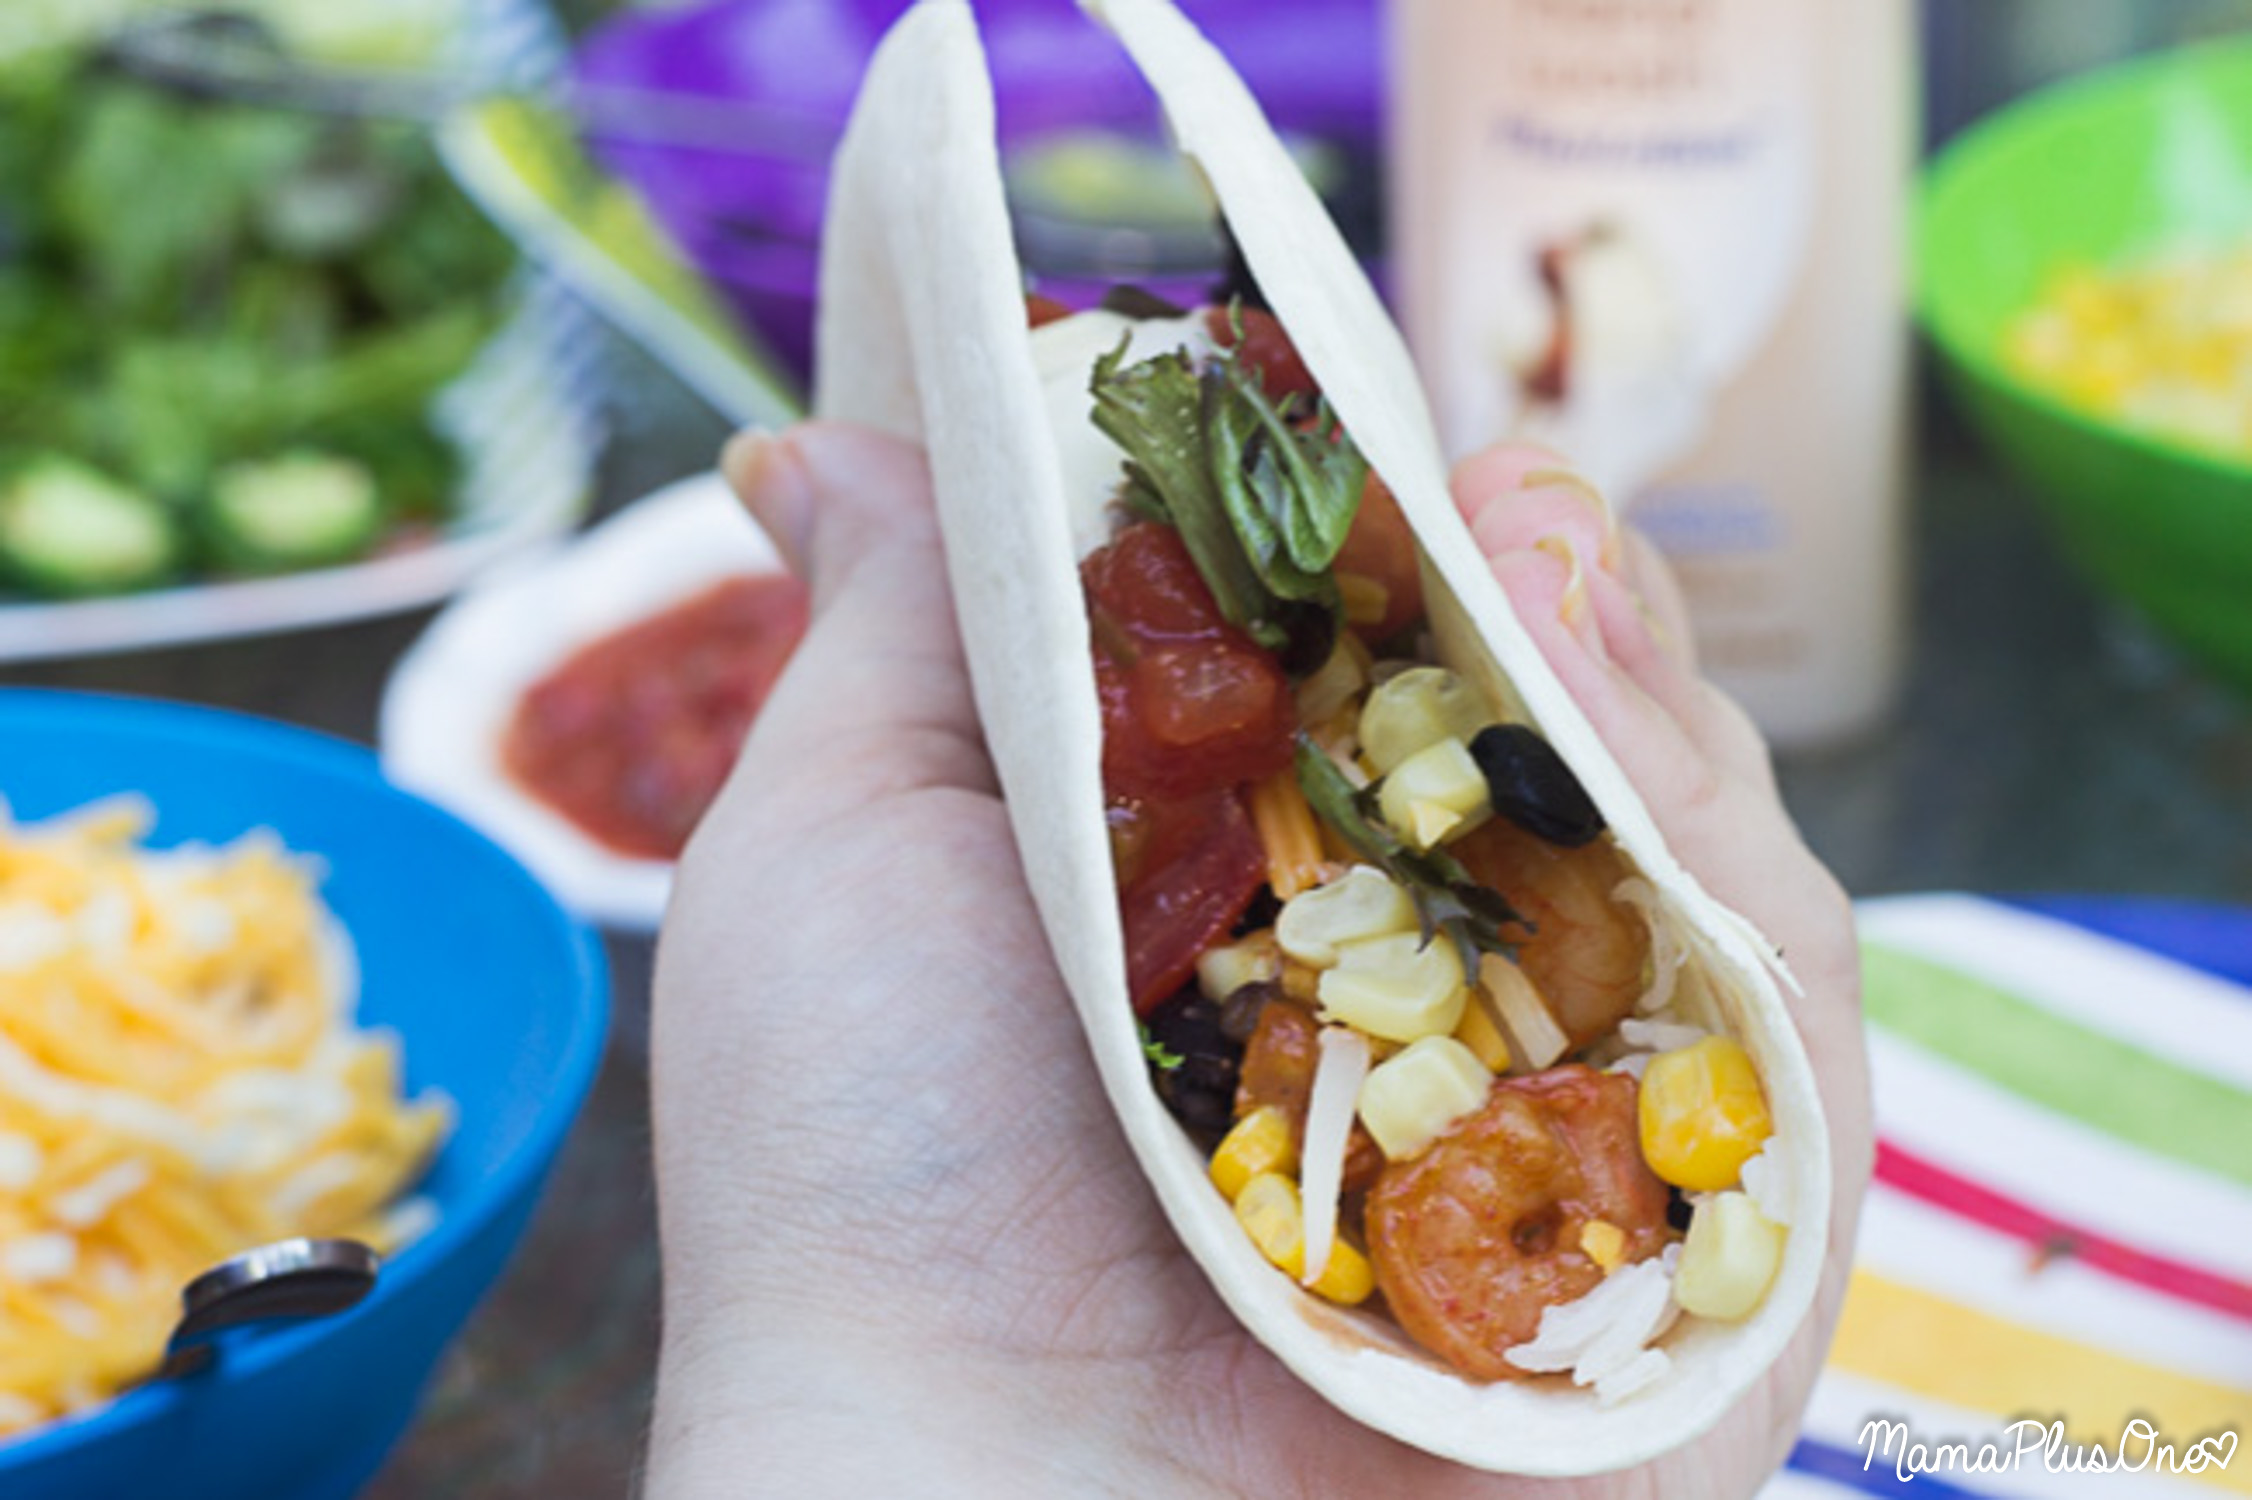 Nothing beats family memories and traditions. That's why I love cooking with my family every year on our annual summer vacation. For me, trips to the Gulf mean time spent with family, and fresh flavor, including the flavors at my favorite beach restaurant. I'm re-creating that Gulf flavor in my Midwest home with these easy Shrimp tacos the whole family will love! [ad]